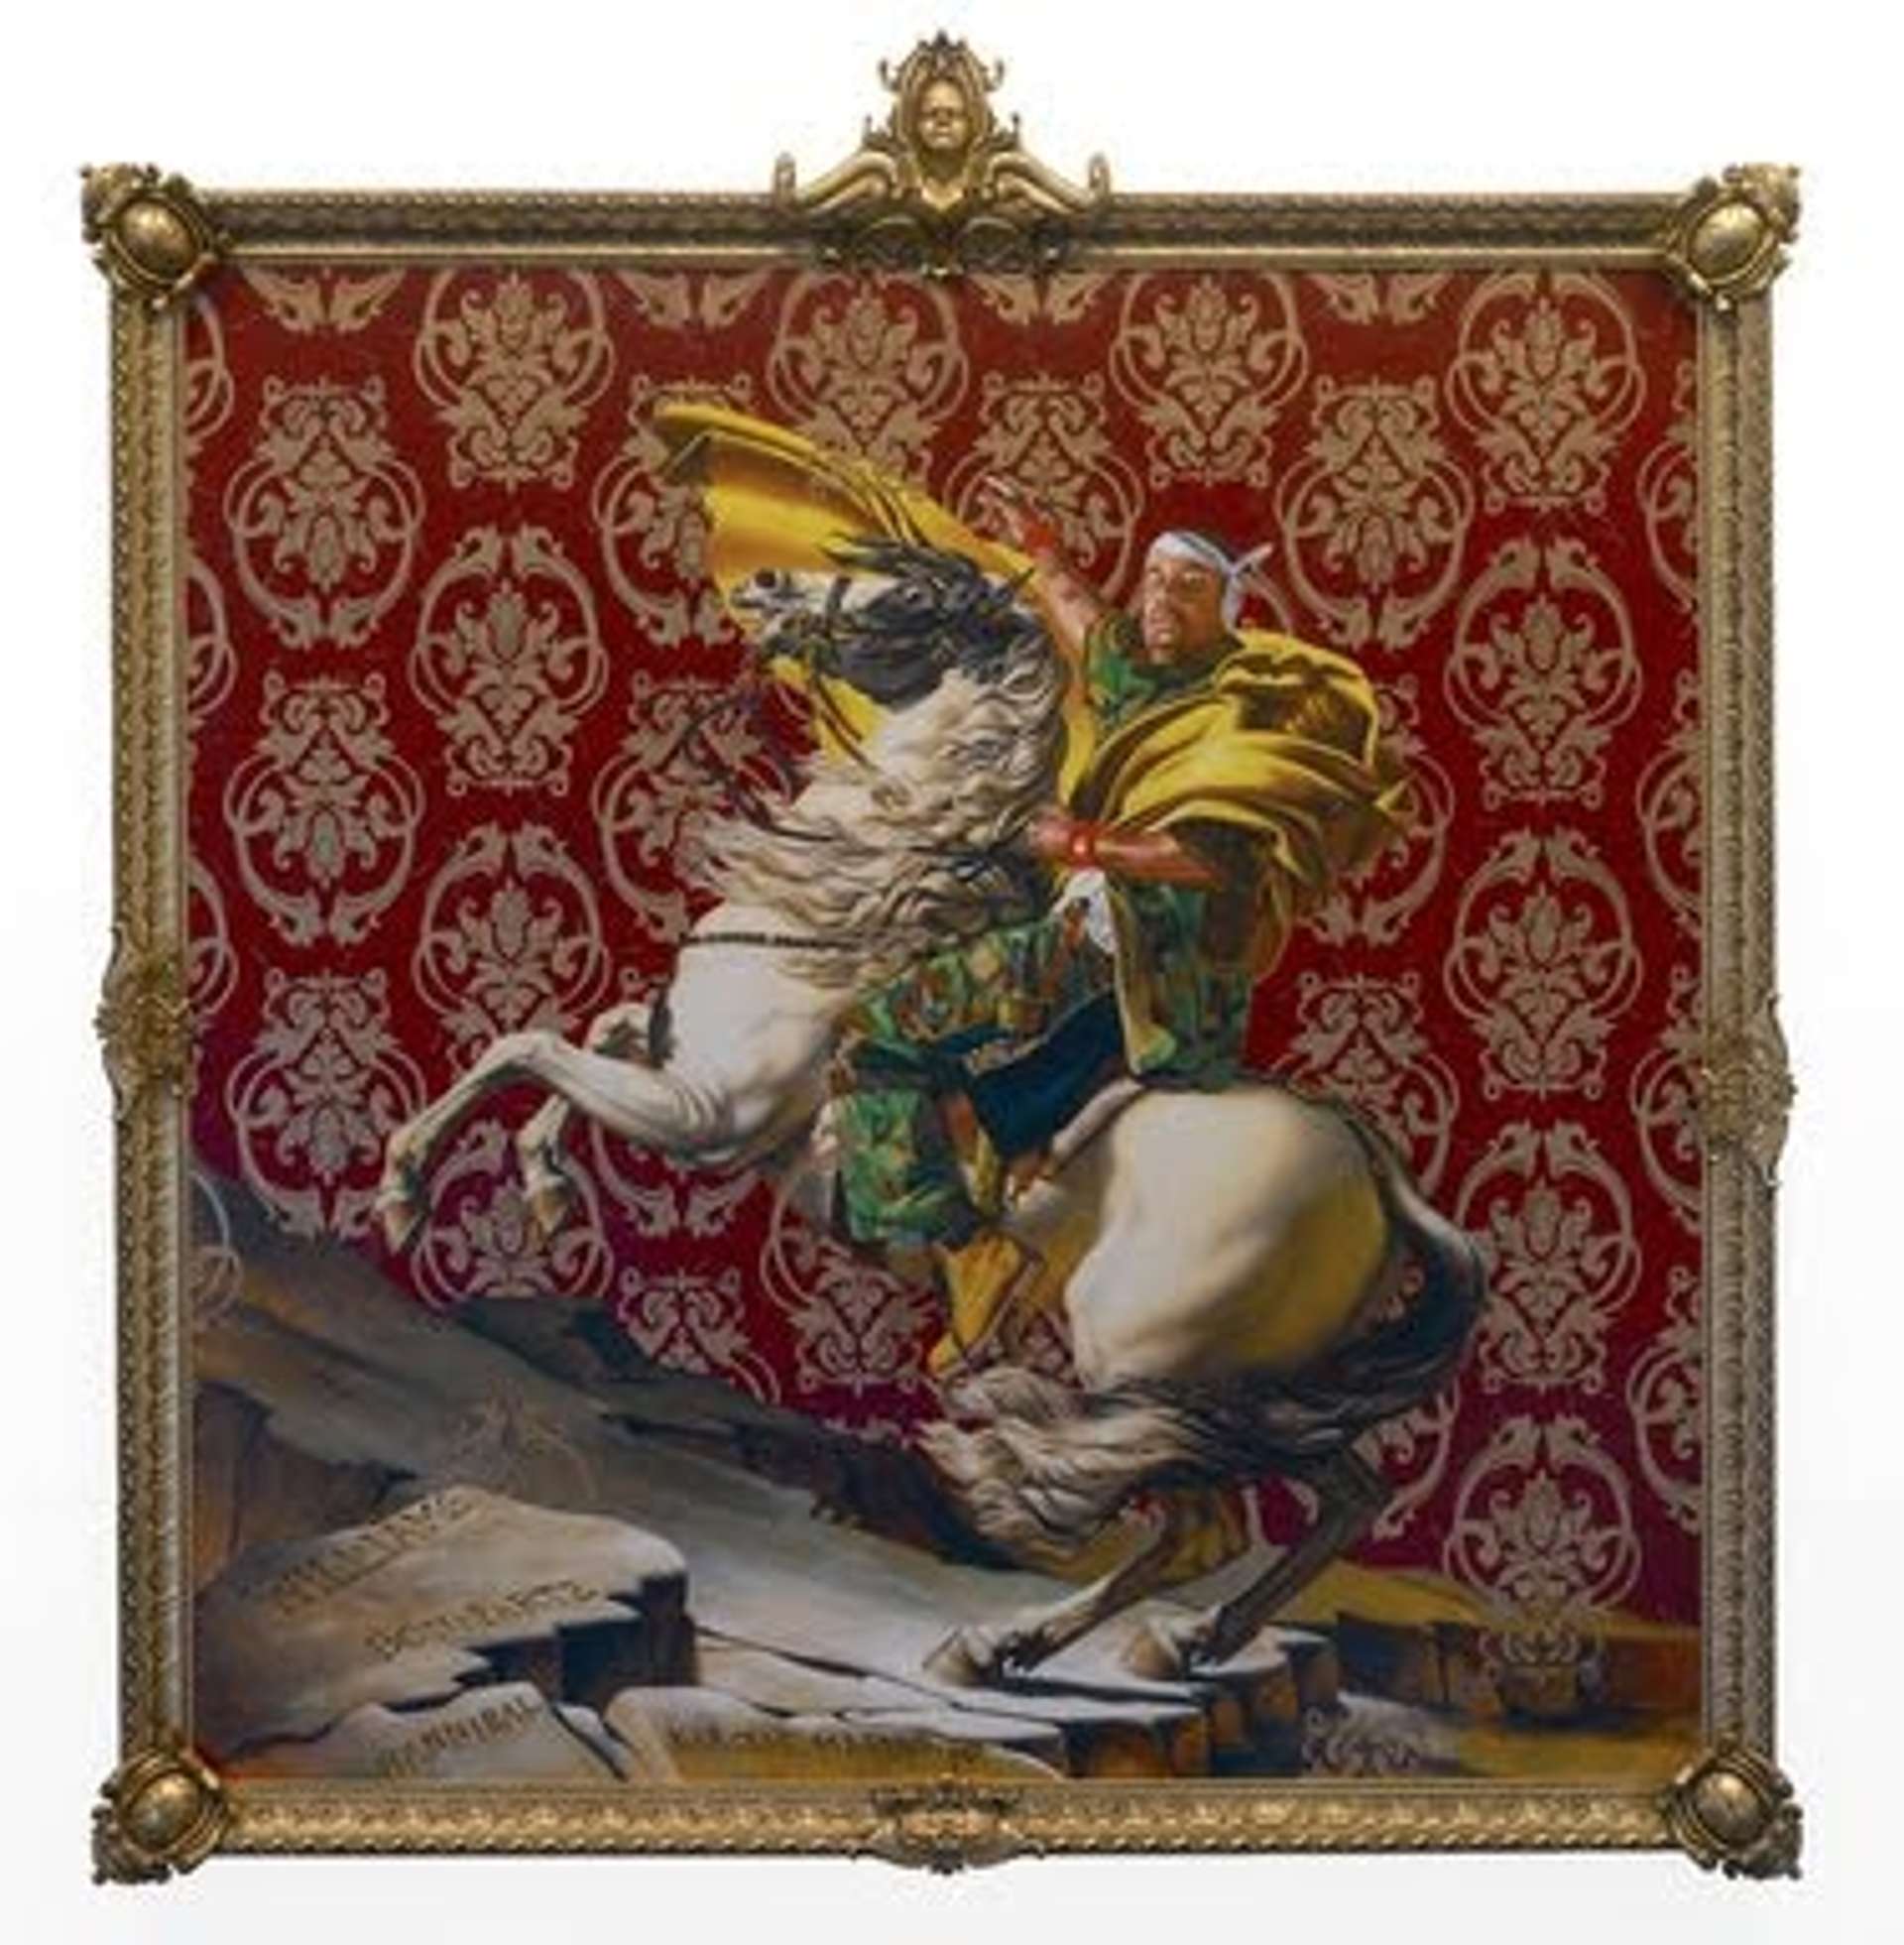 Kehinde Wiley’s Napoleon Leading The Army Over The Alps. A man riding a horse pointing forward against a red, decorative background.